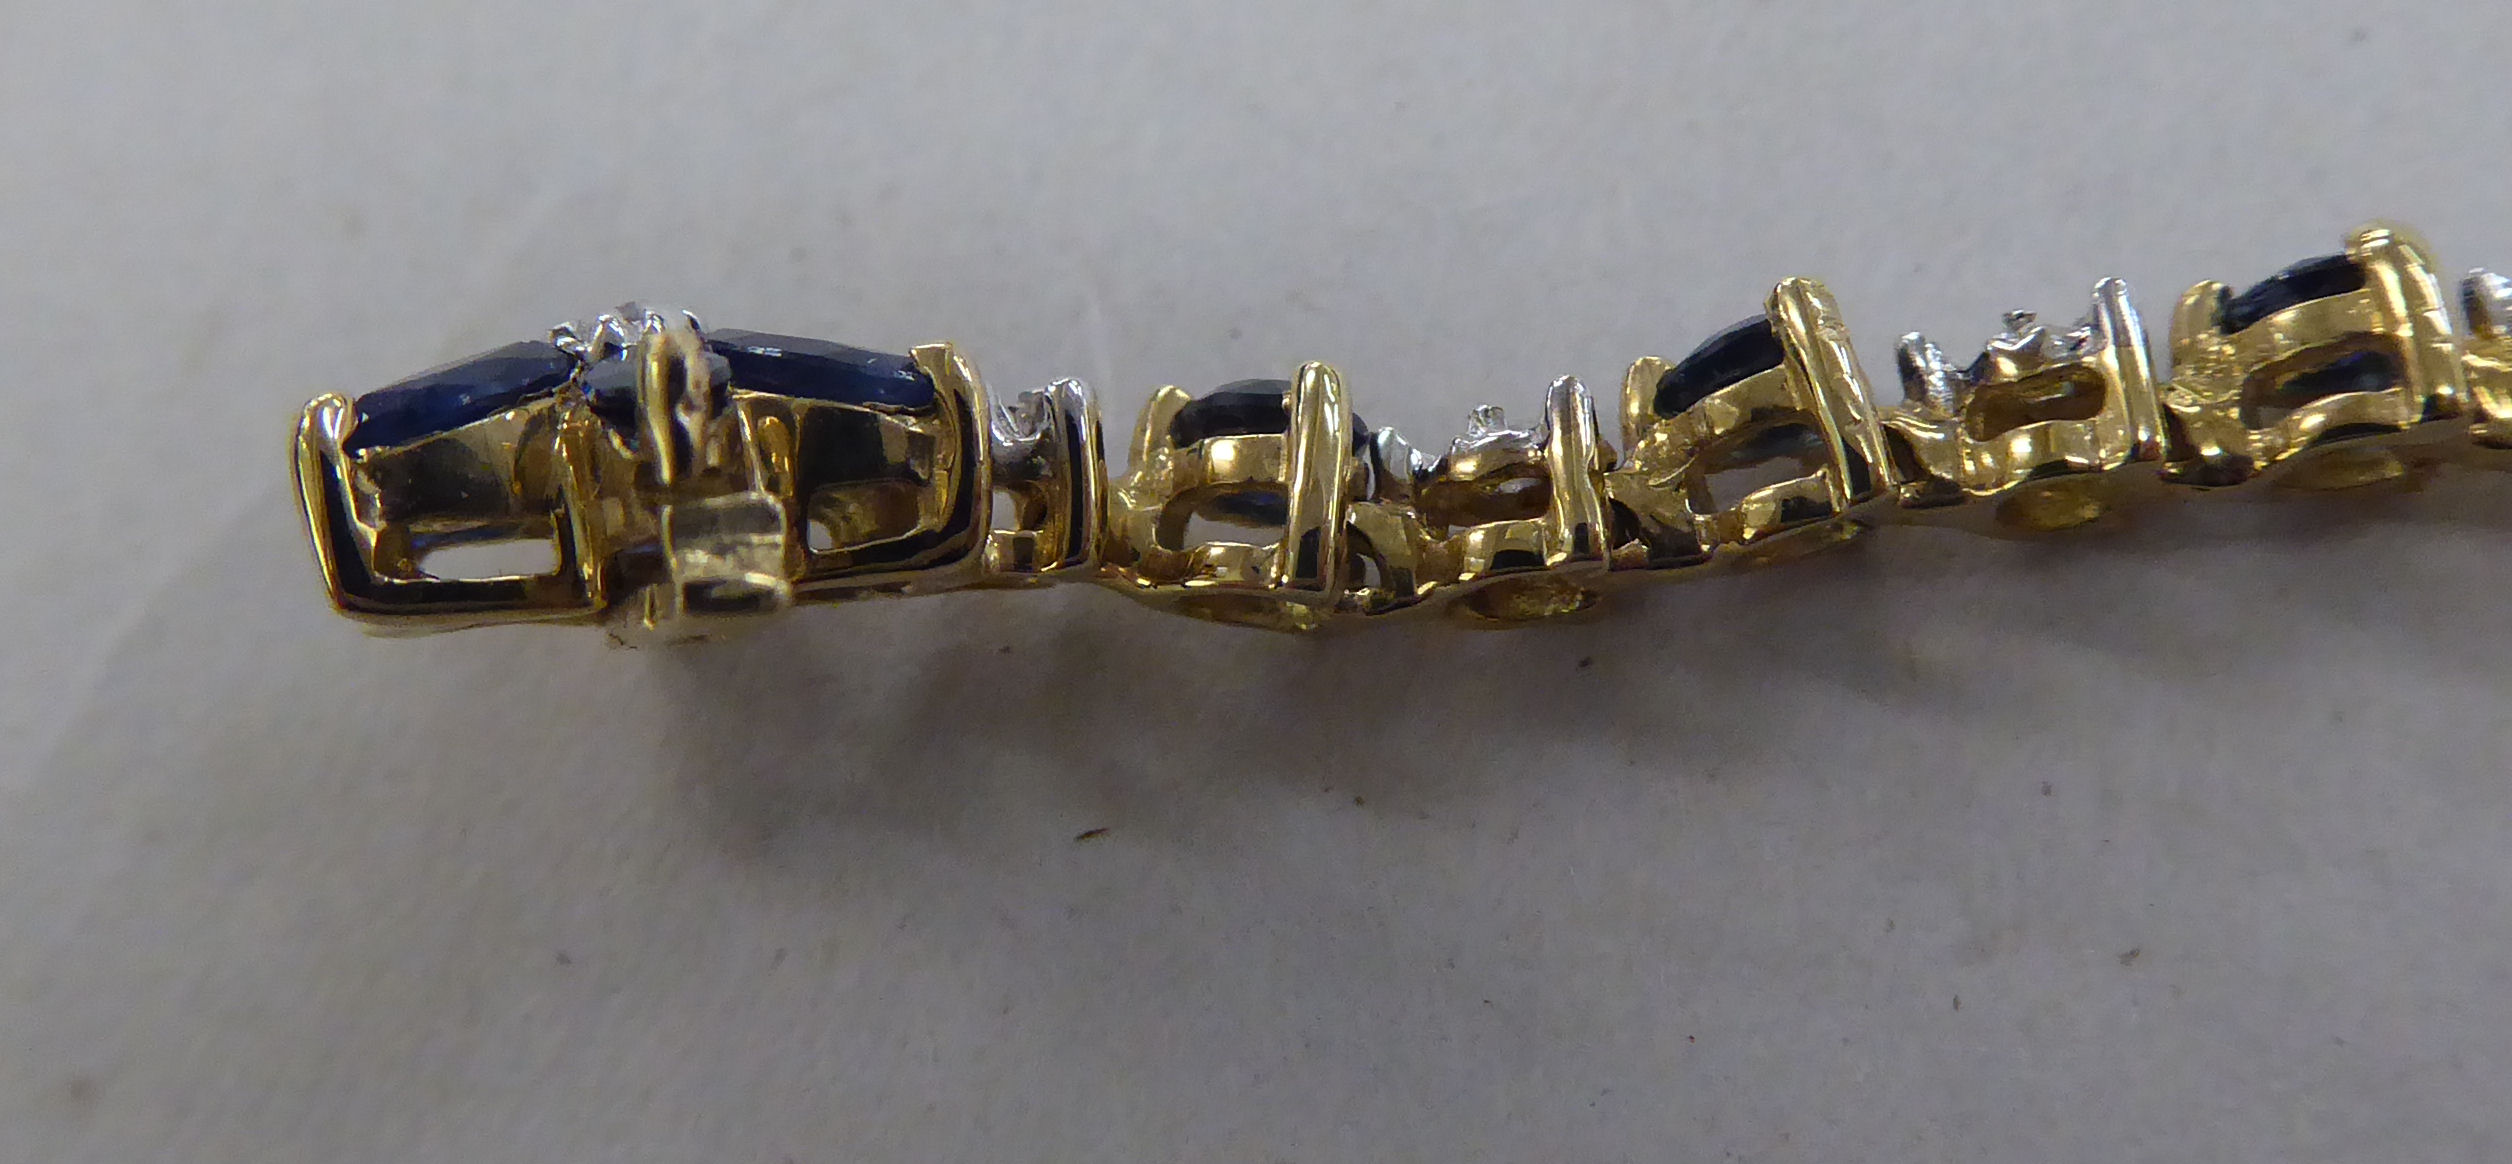 A 10k gold bracelet, set with sapphires and diamonds - Image 4 of 4